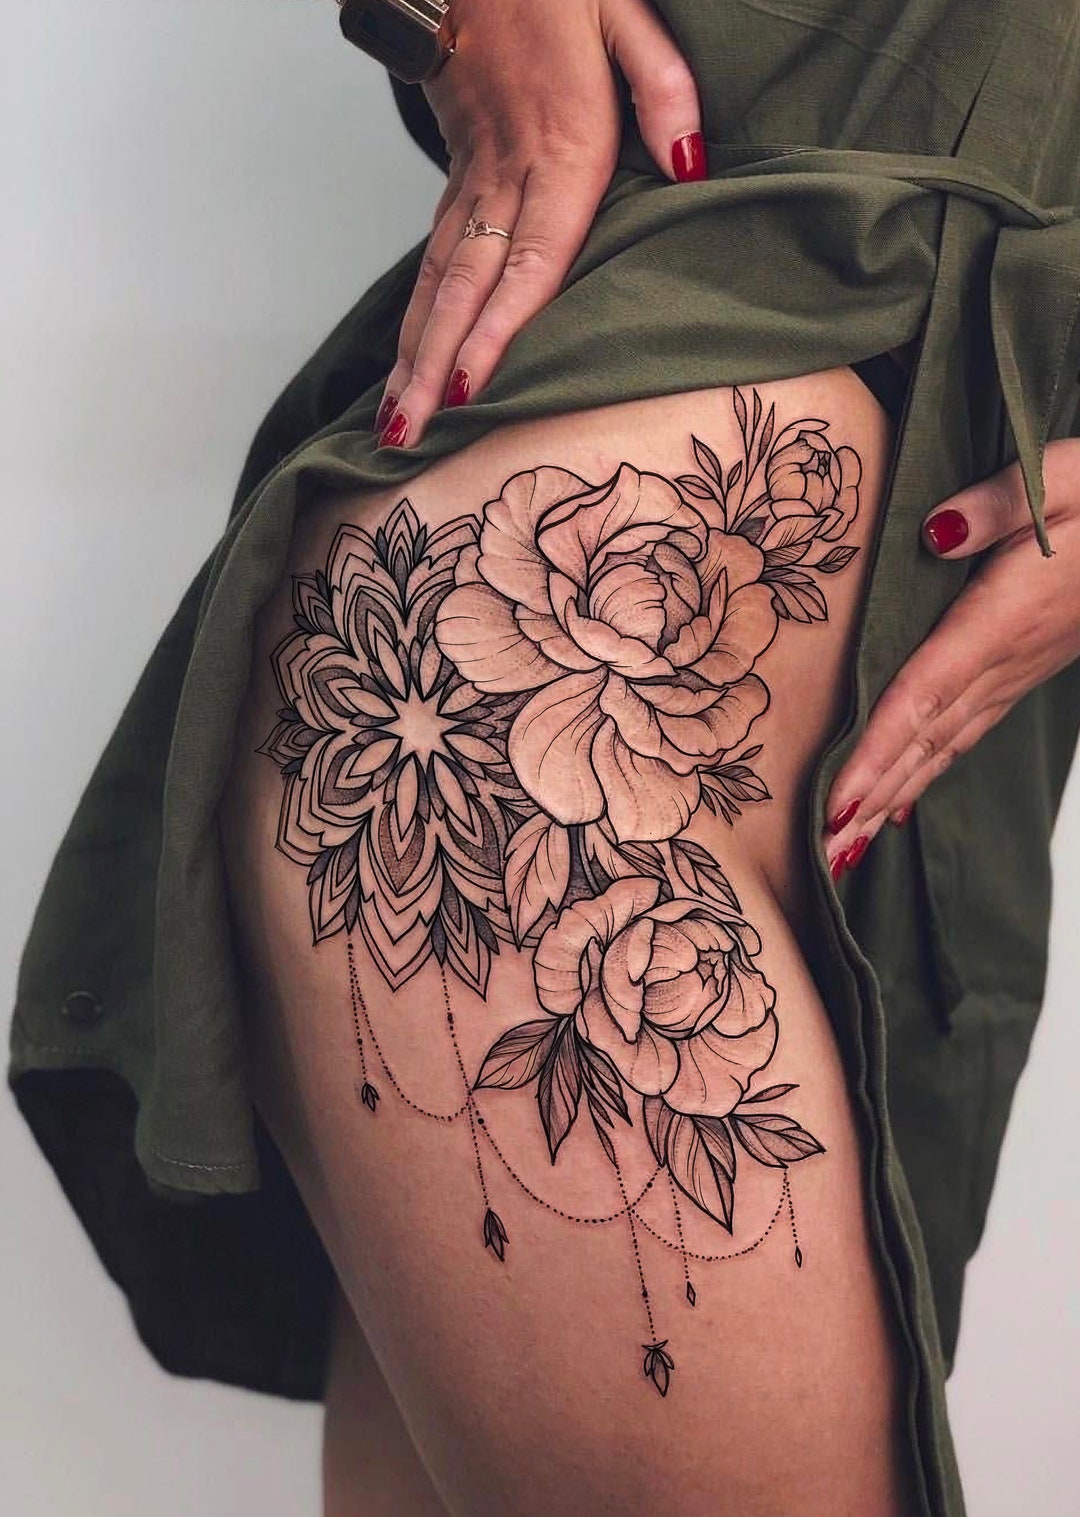 Flower linework tattoo and mandalatattoo done by our artist All booking  inquiries please contact us at Wa  62 81 741 977 19 Dm   Instagram